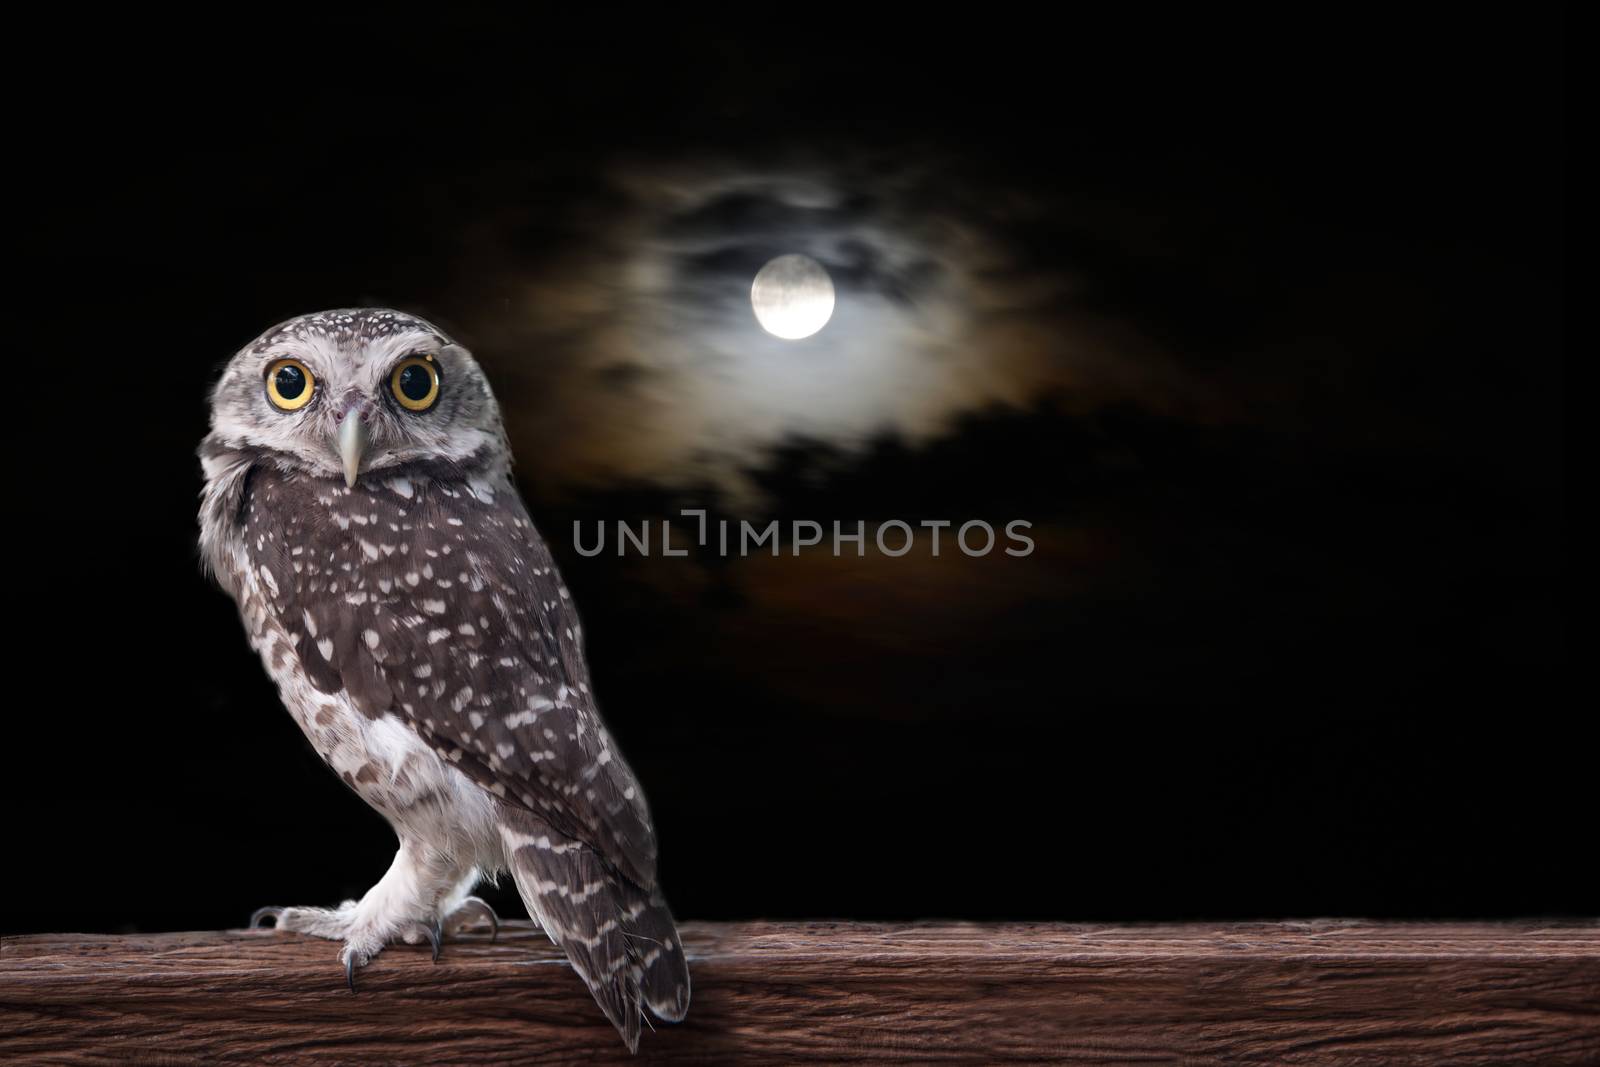 Owl stand on timber in the night under a full moon.